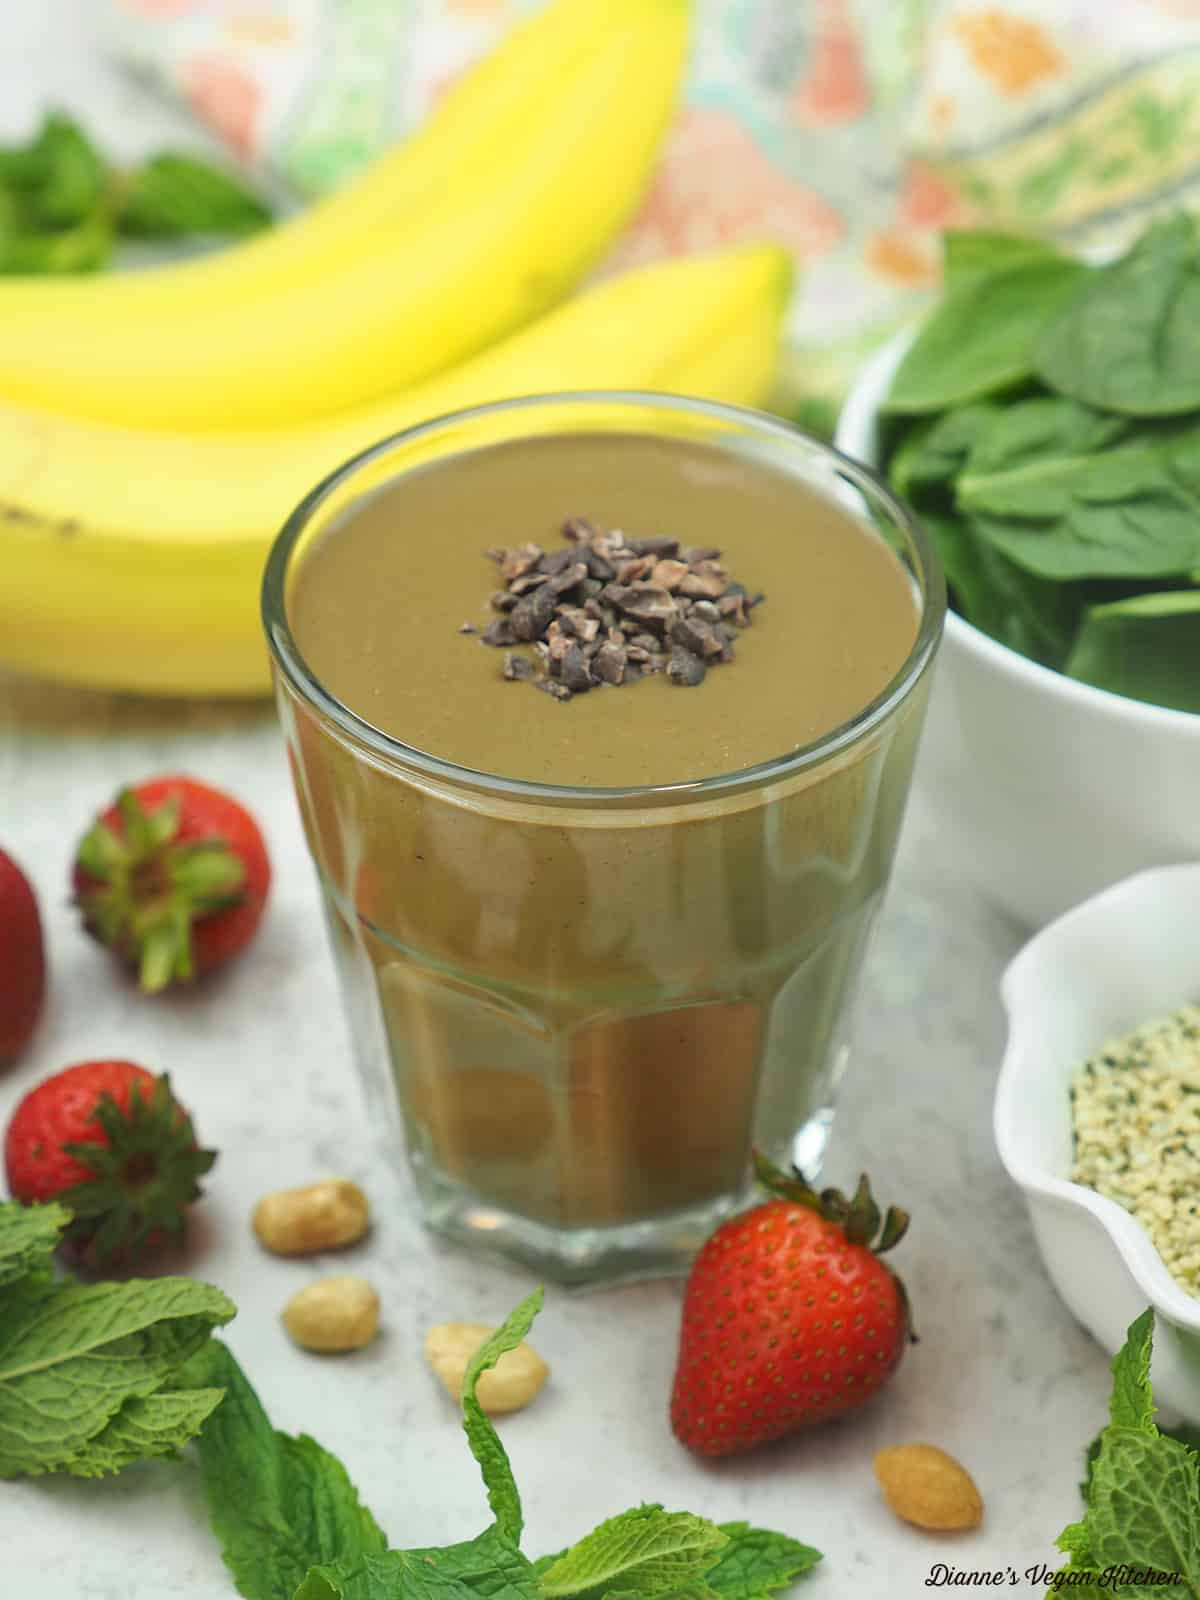 A smoothie with bananas, spinach, strawberries, mint leaves, peanuts and flax seeds